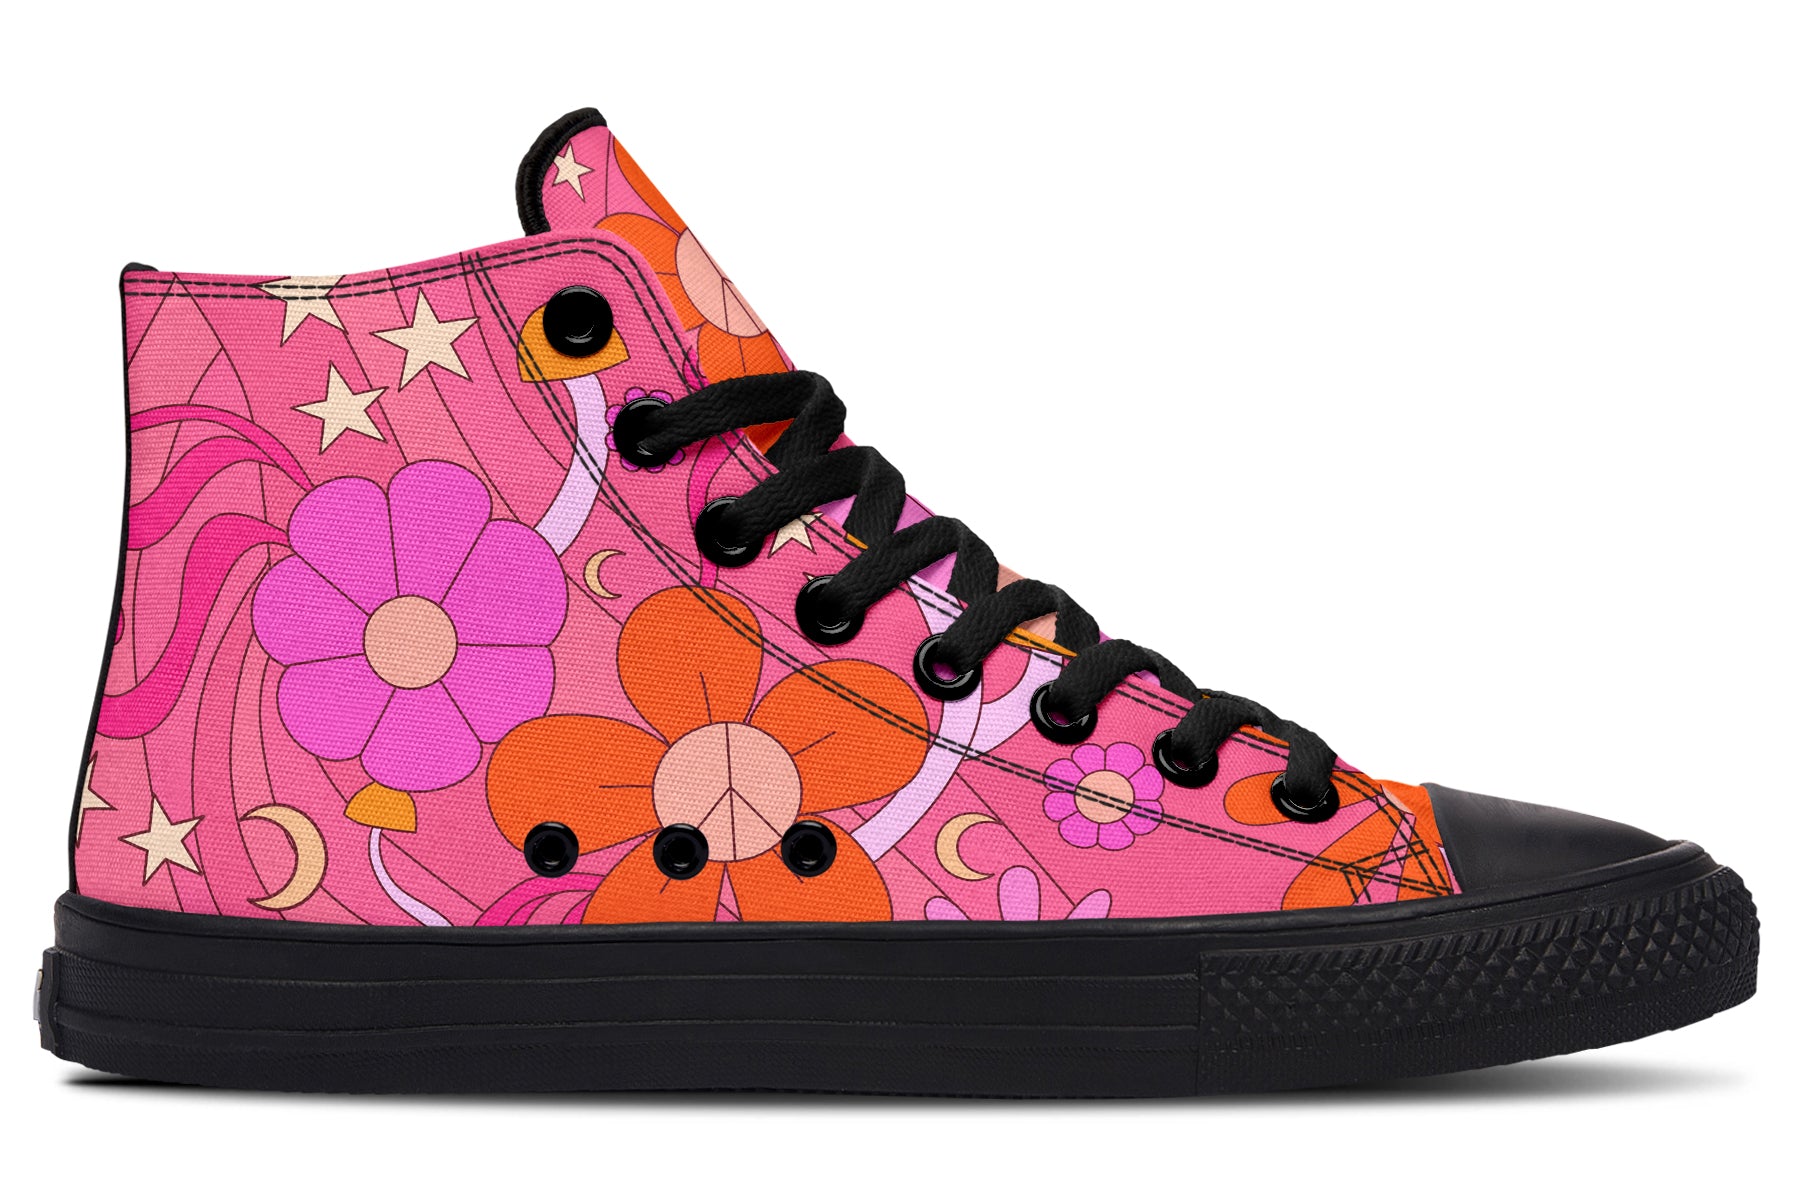 Molly's Mismatched Retro Daisies High Tops